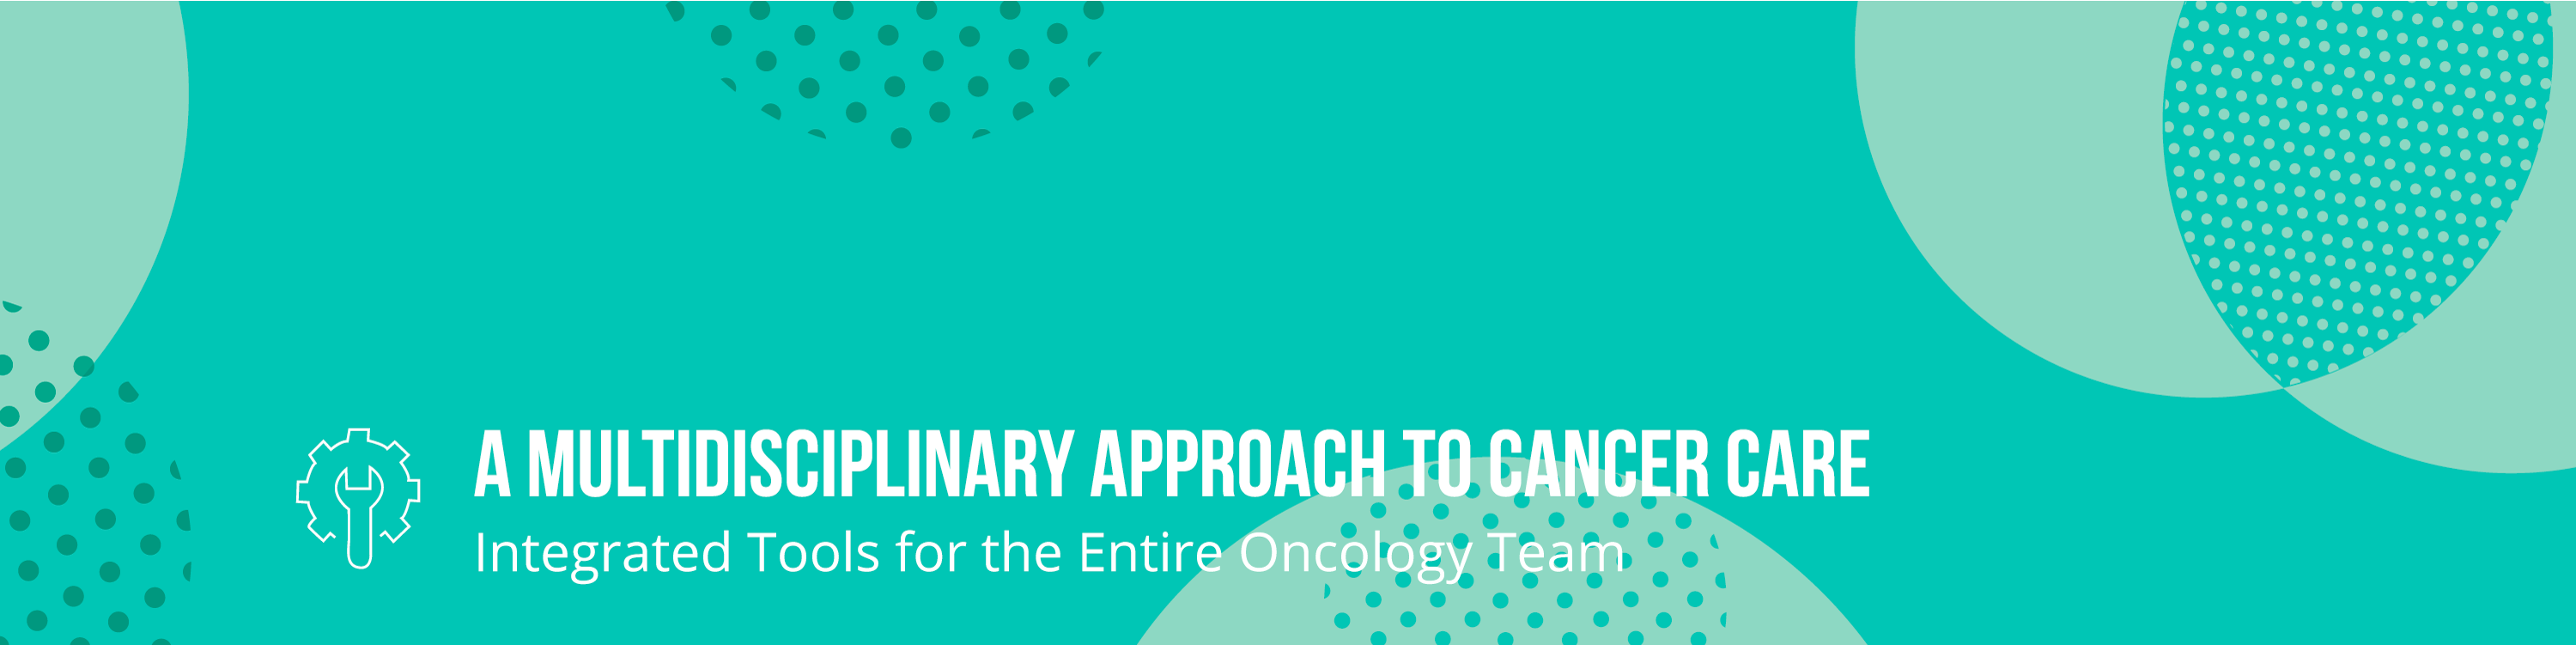 A Multidisciplinary Approach to Cancer Care